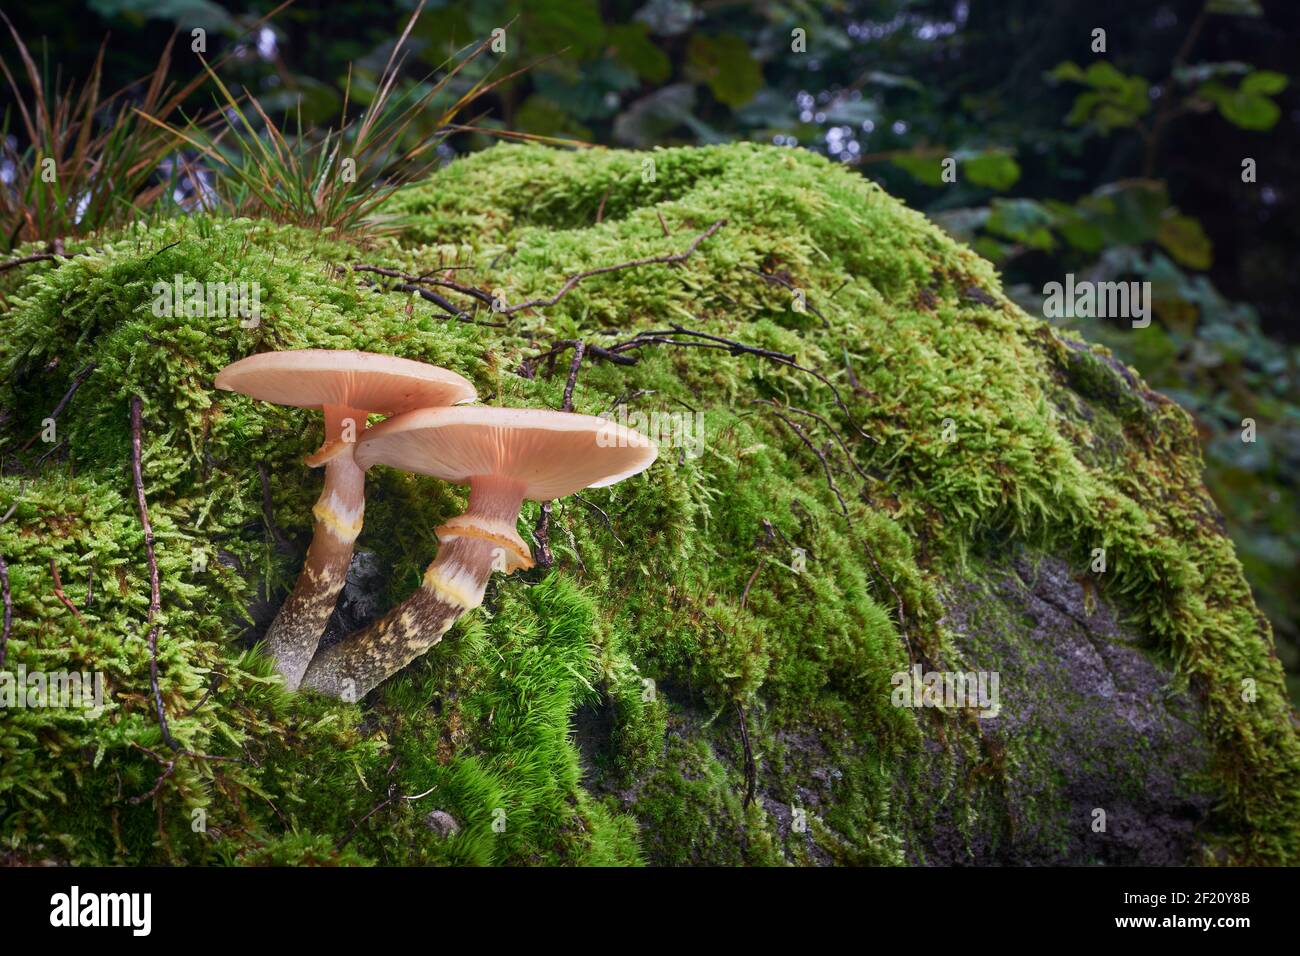 Armillaria gallica is delicious edible mushroom from Central Europe Stock Photo